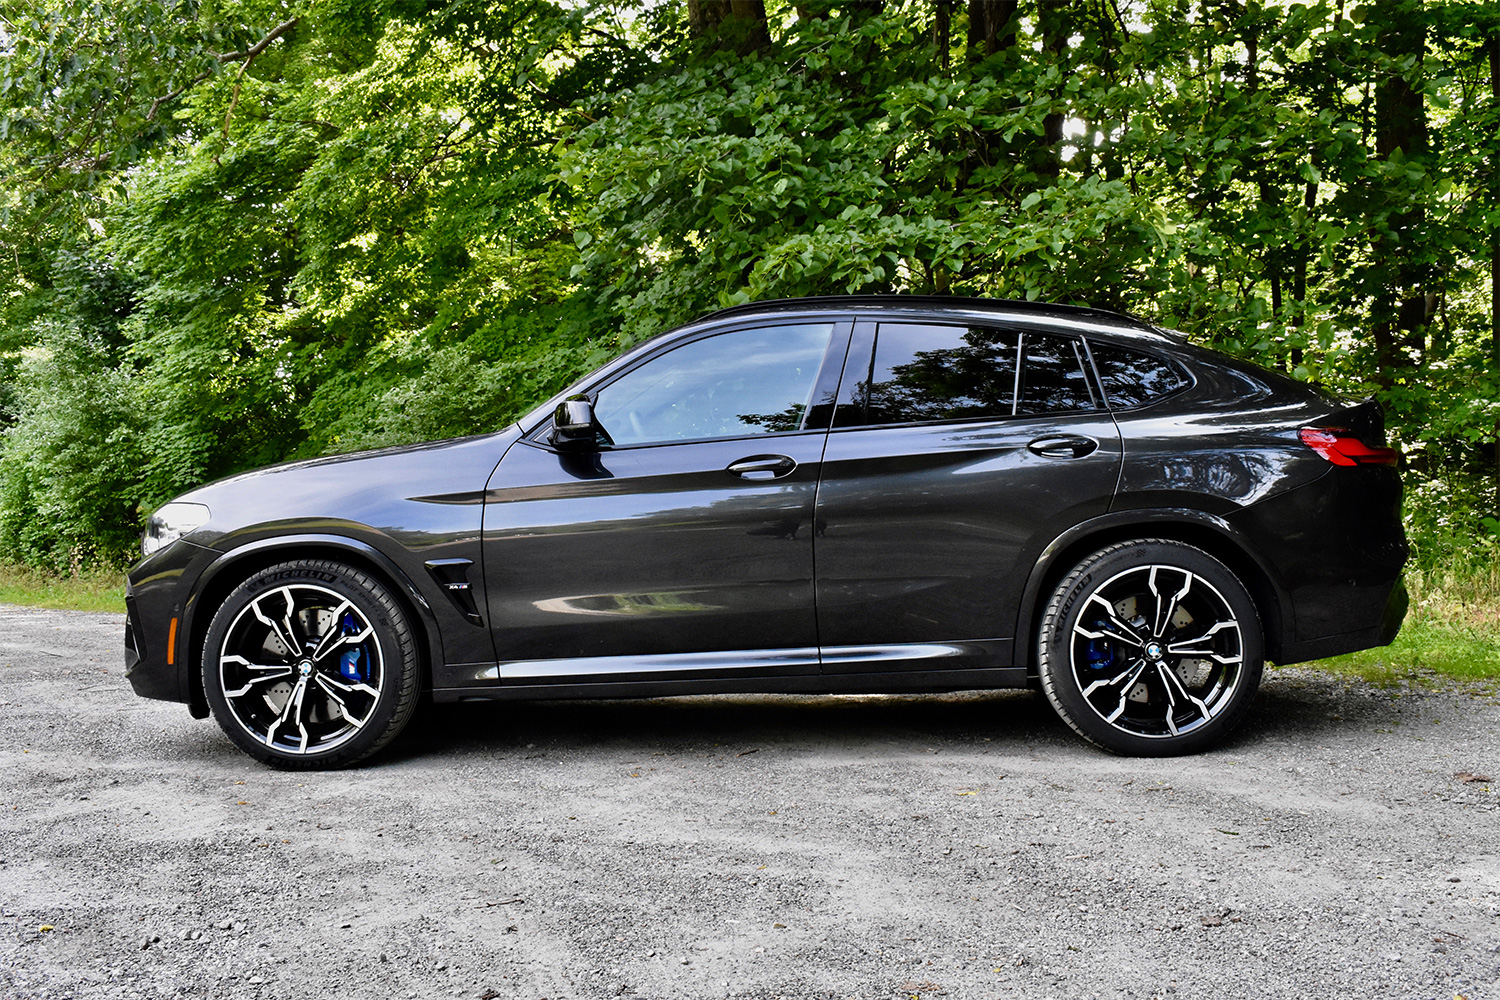 2020 bmw x3 m x4 first drive review 2